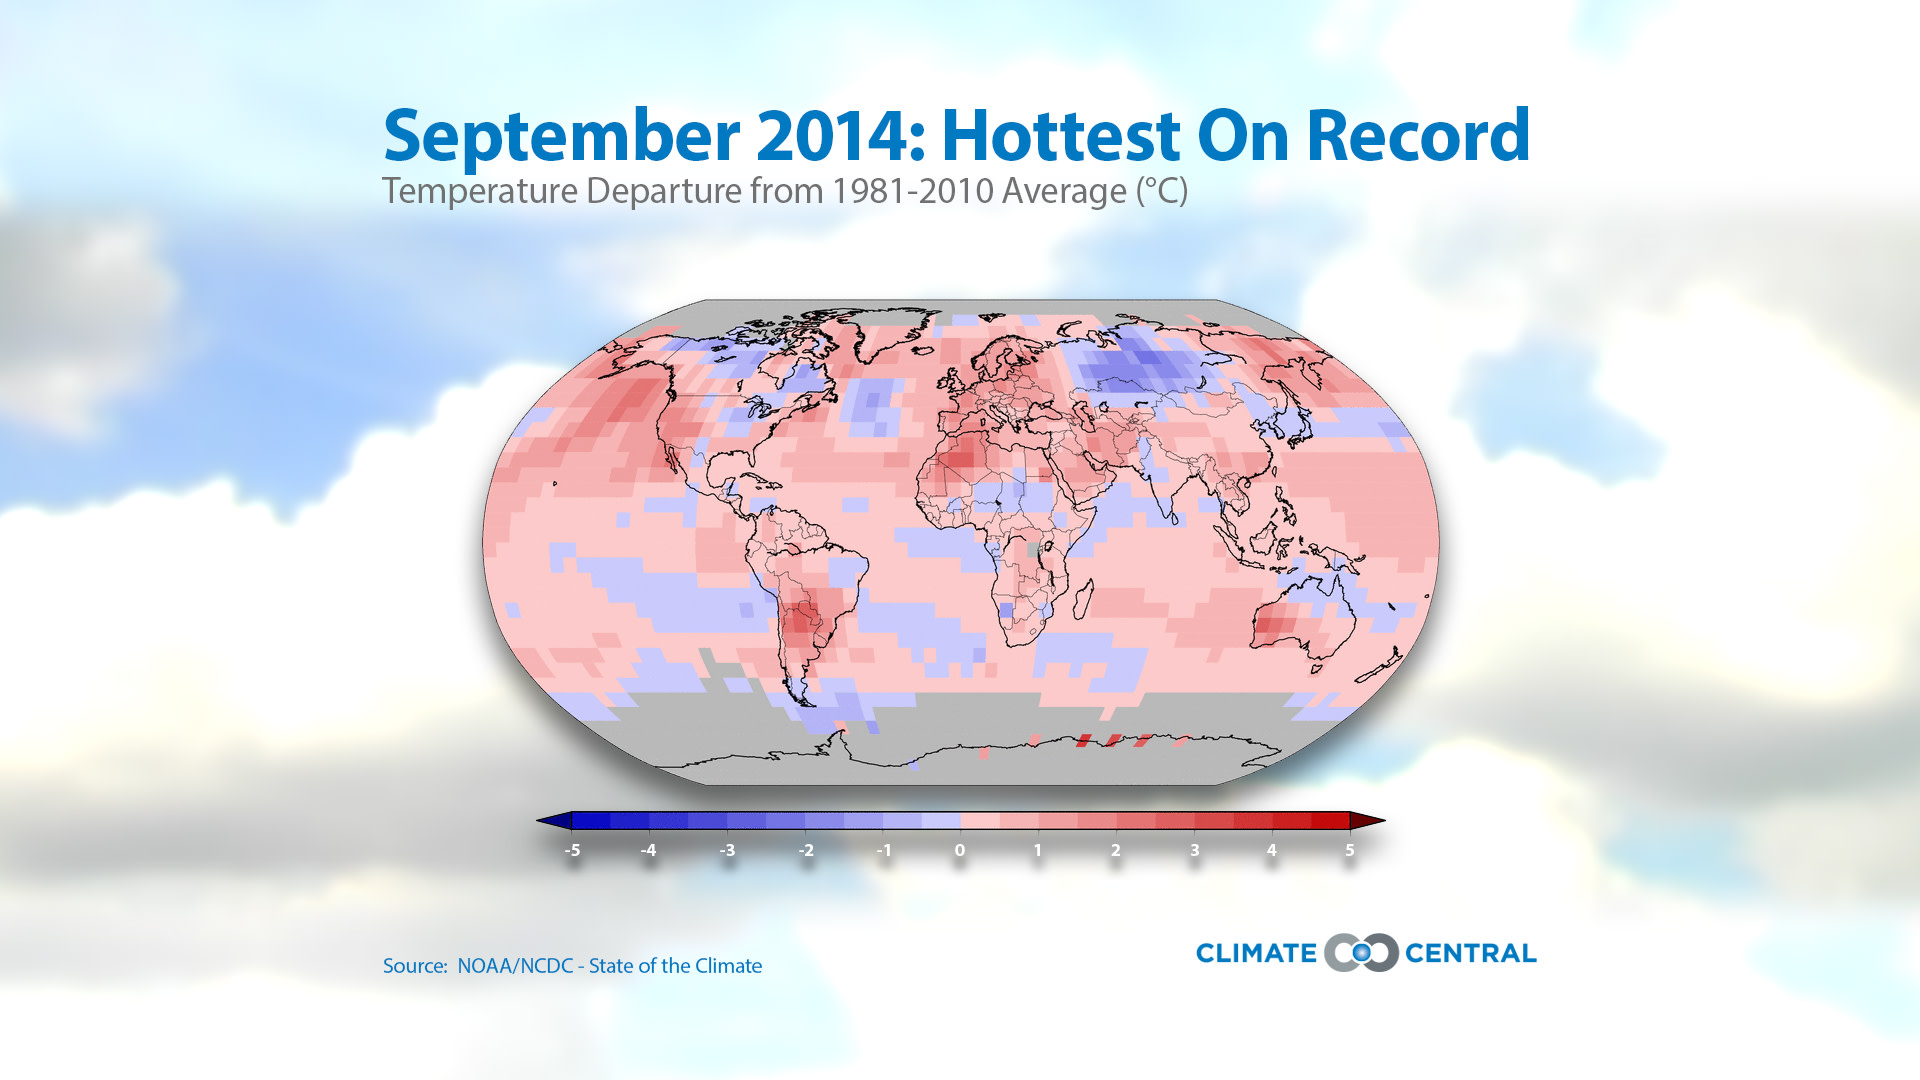 Set 4 - 2014 on Pace for Hottest Year